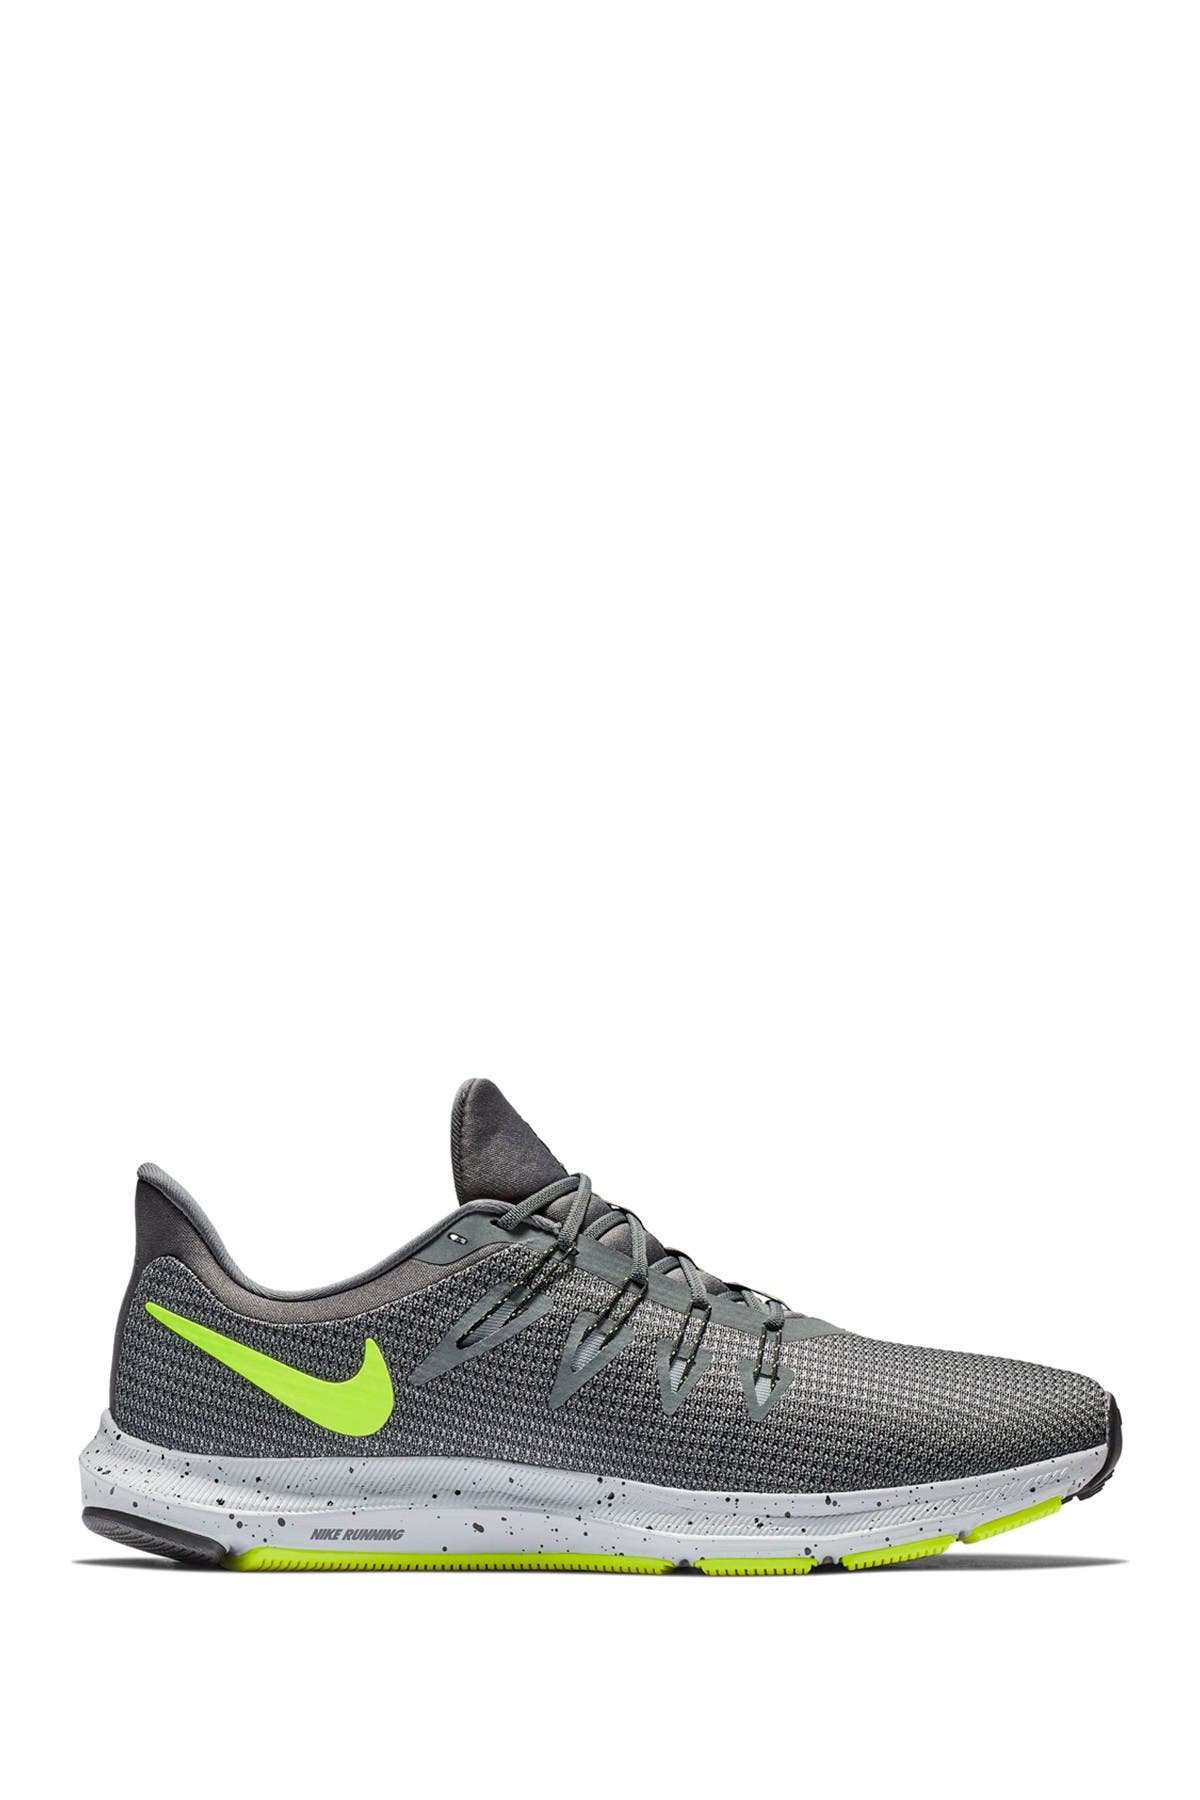 nike quest trail running shoes